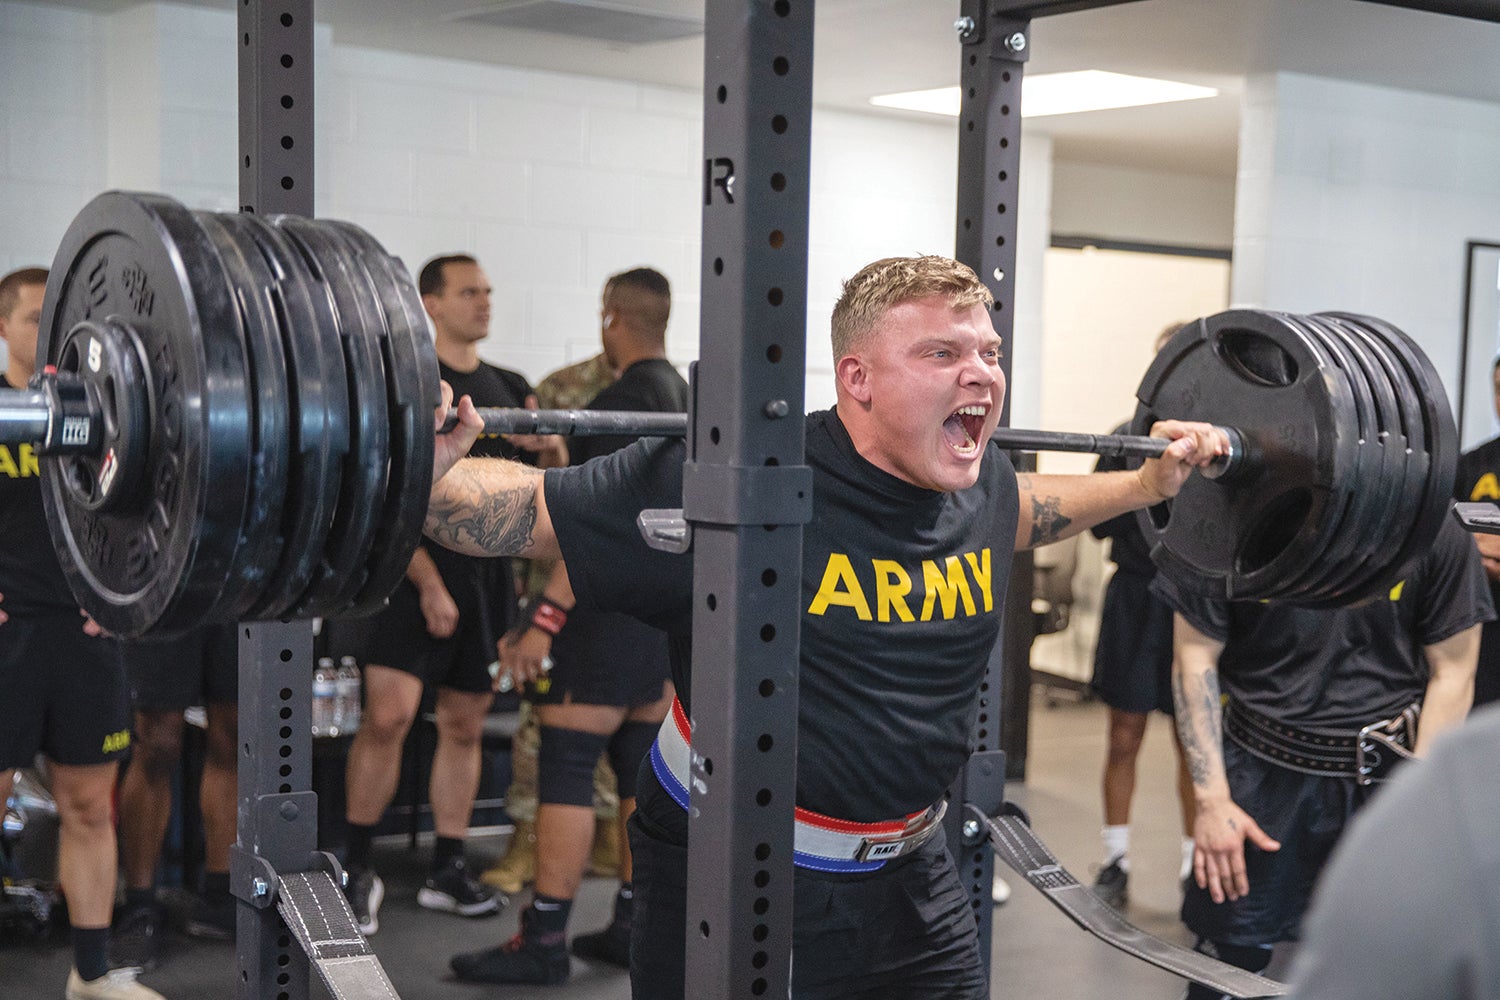 Soldiers from the 10th Mountain Division Sustainment Brigade compete in a weightlifting competition hosted by Holistic Health and Fitness trainers at Fort Drum, New York. (Credit: U.S. Army/Spc. Ethan Scofield)